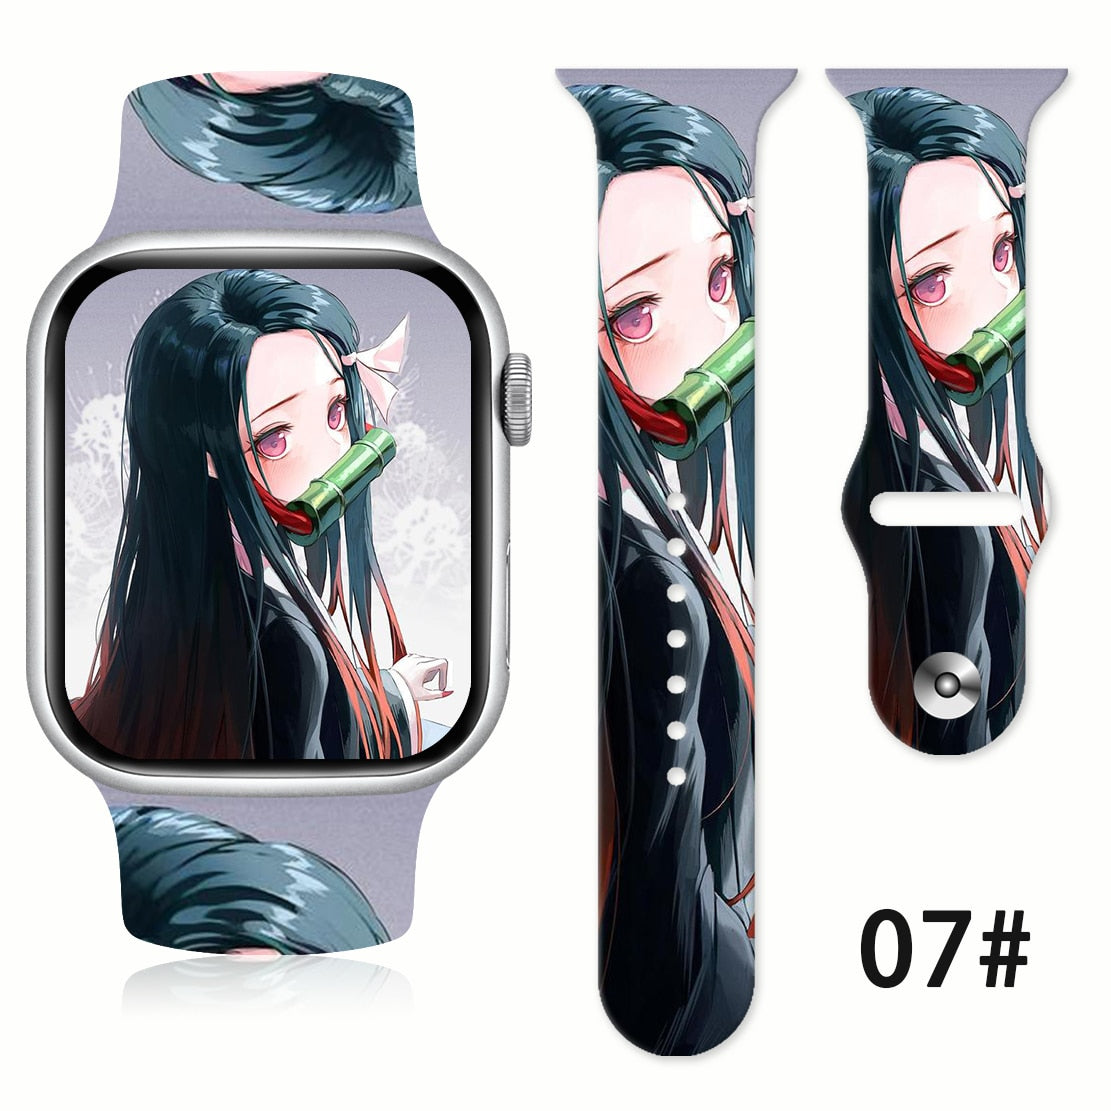 Demon Slayer Strap Band for Apple Watch 07